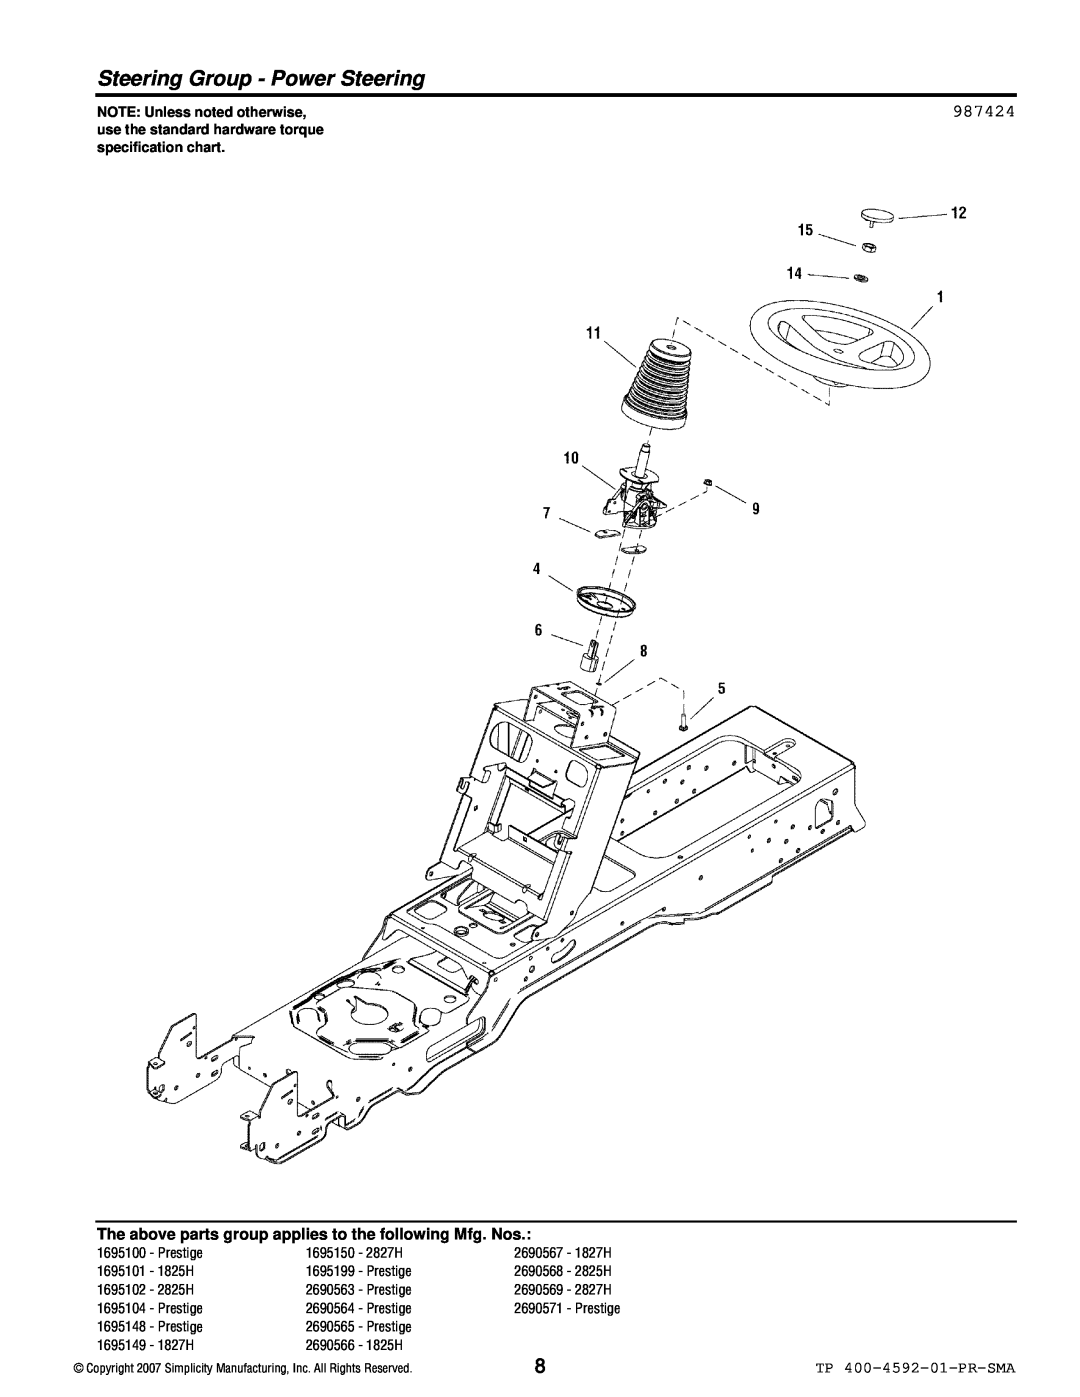 Simplicity 1800 Series manual Steering Group - Power Steering, 987424, TP 400-4592-01-PR-SMA, NOTE: Unless noted otherwise 